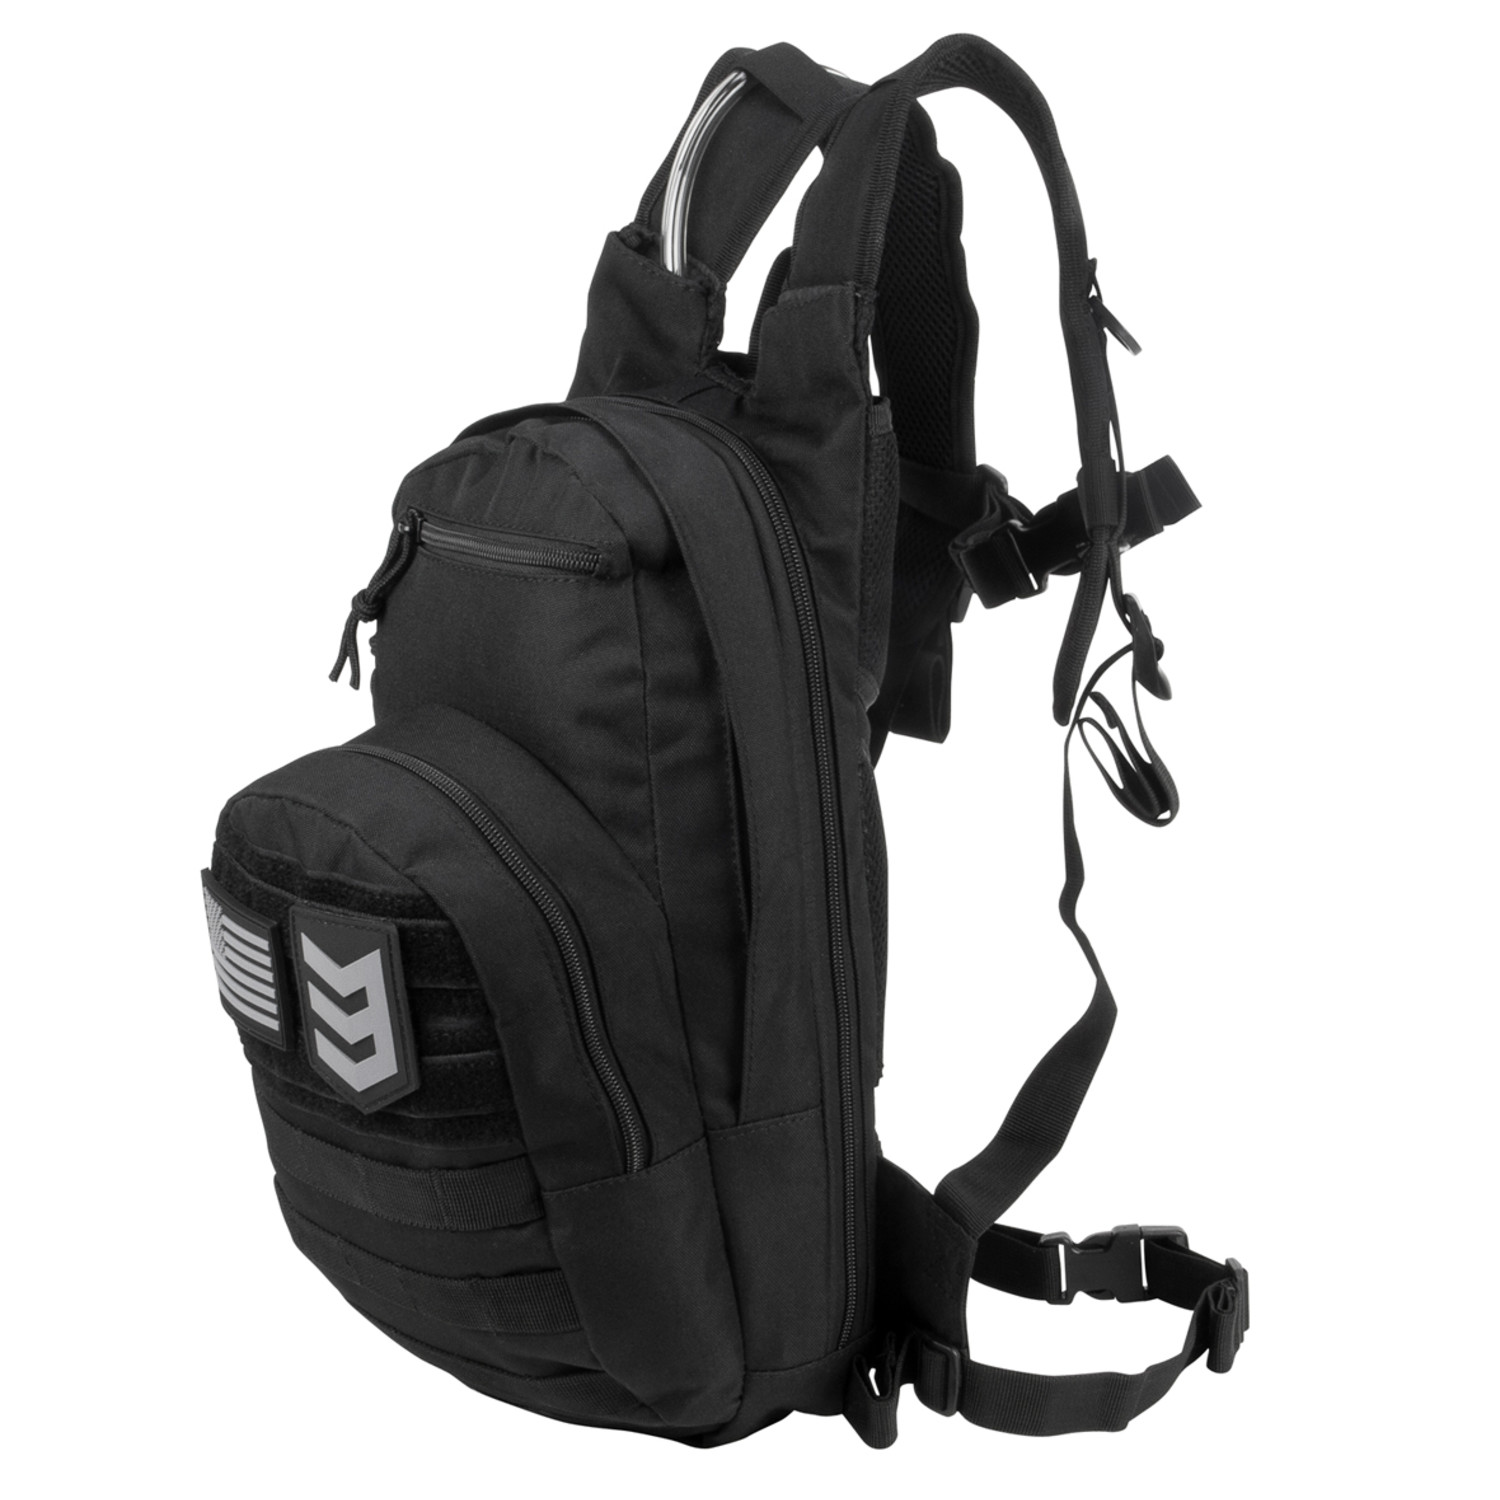 Bandit Hydration Pack (Black) - 3V Gear - Touch of Modern